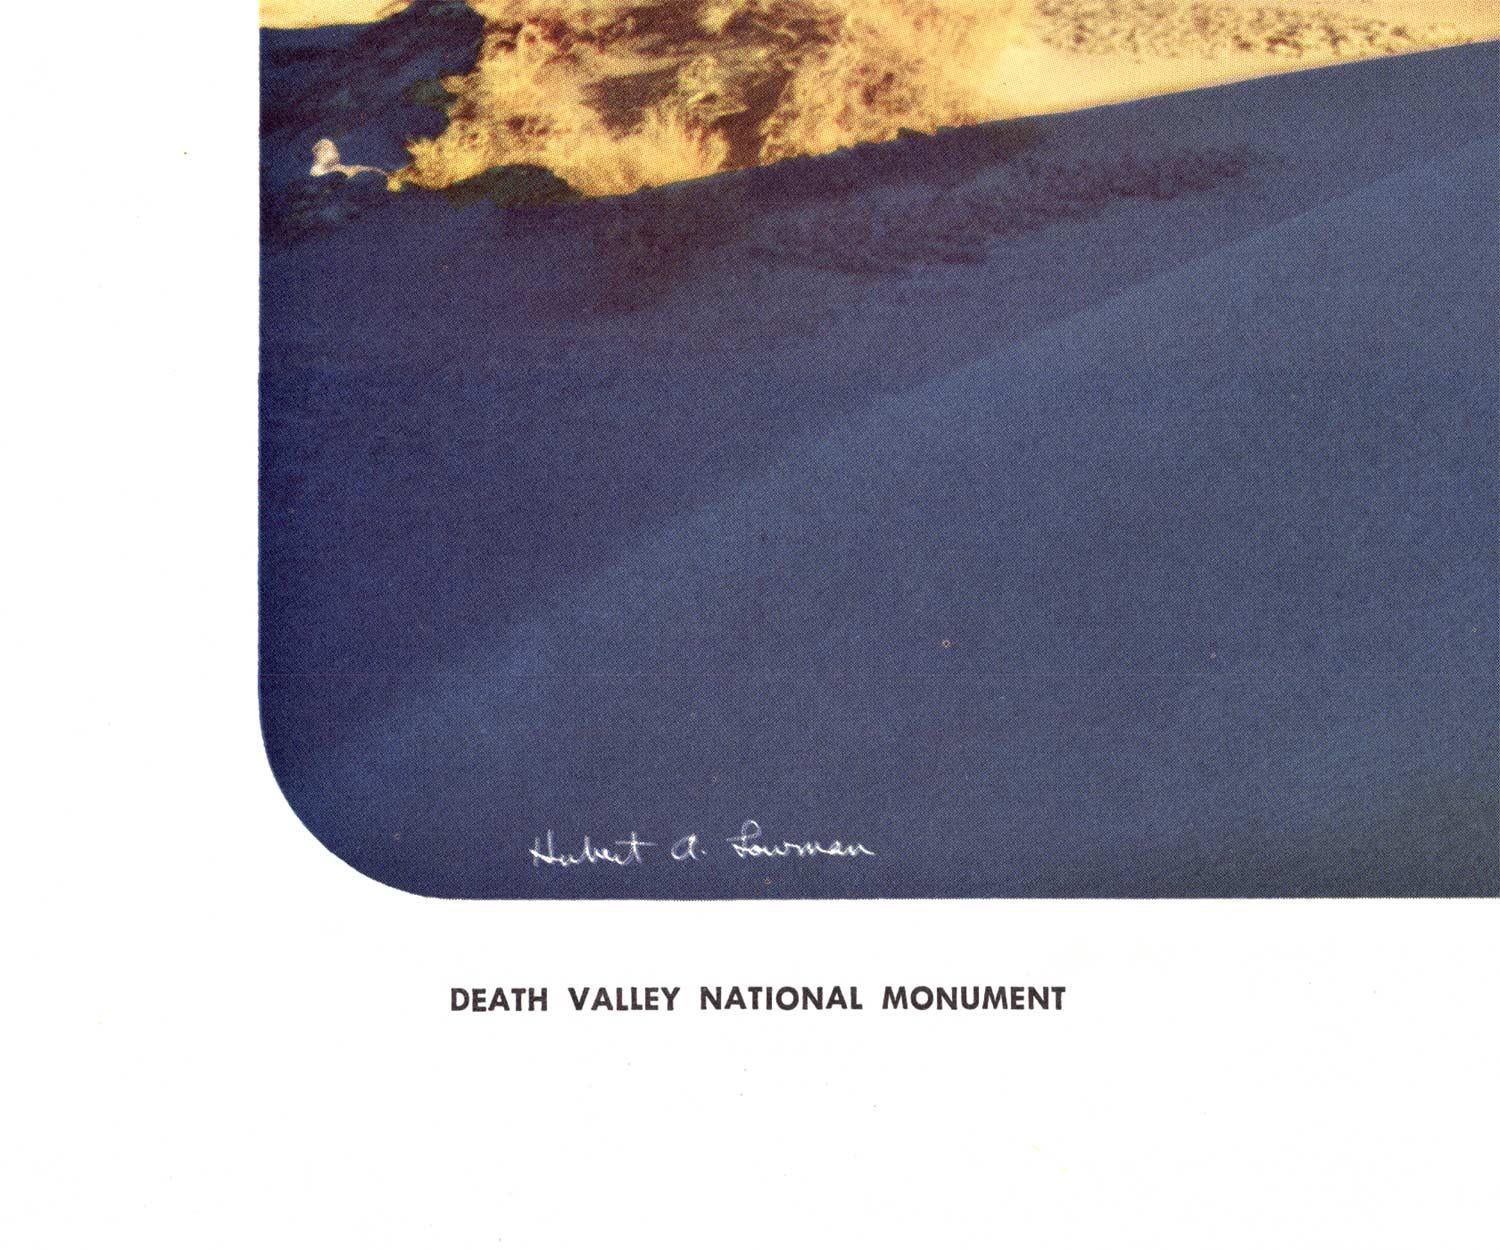 Original Death Valley National Monument American Airlines vintage poster - Print by Hubert A. Lowman